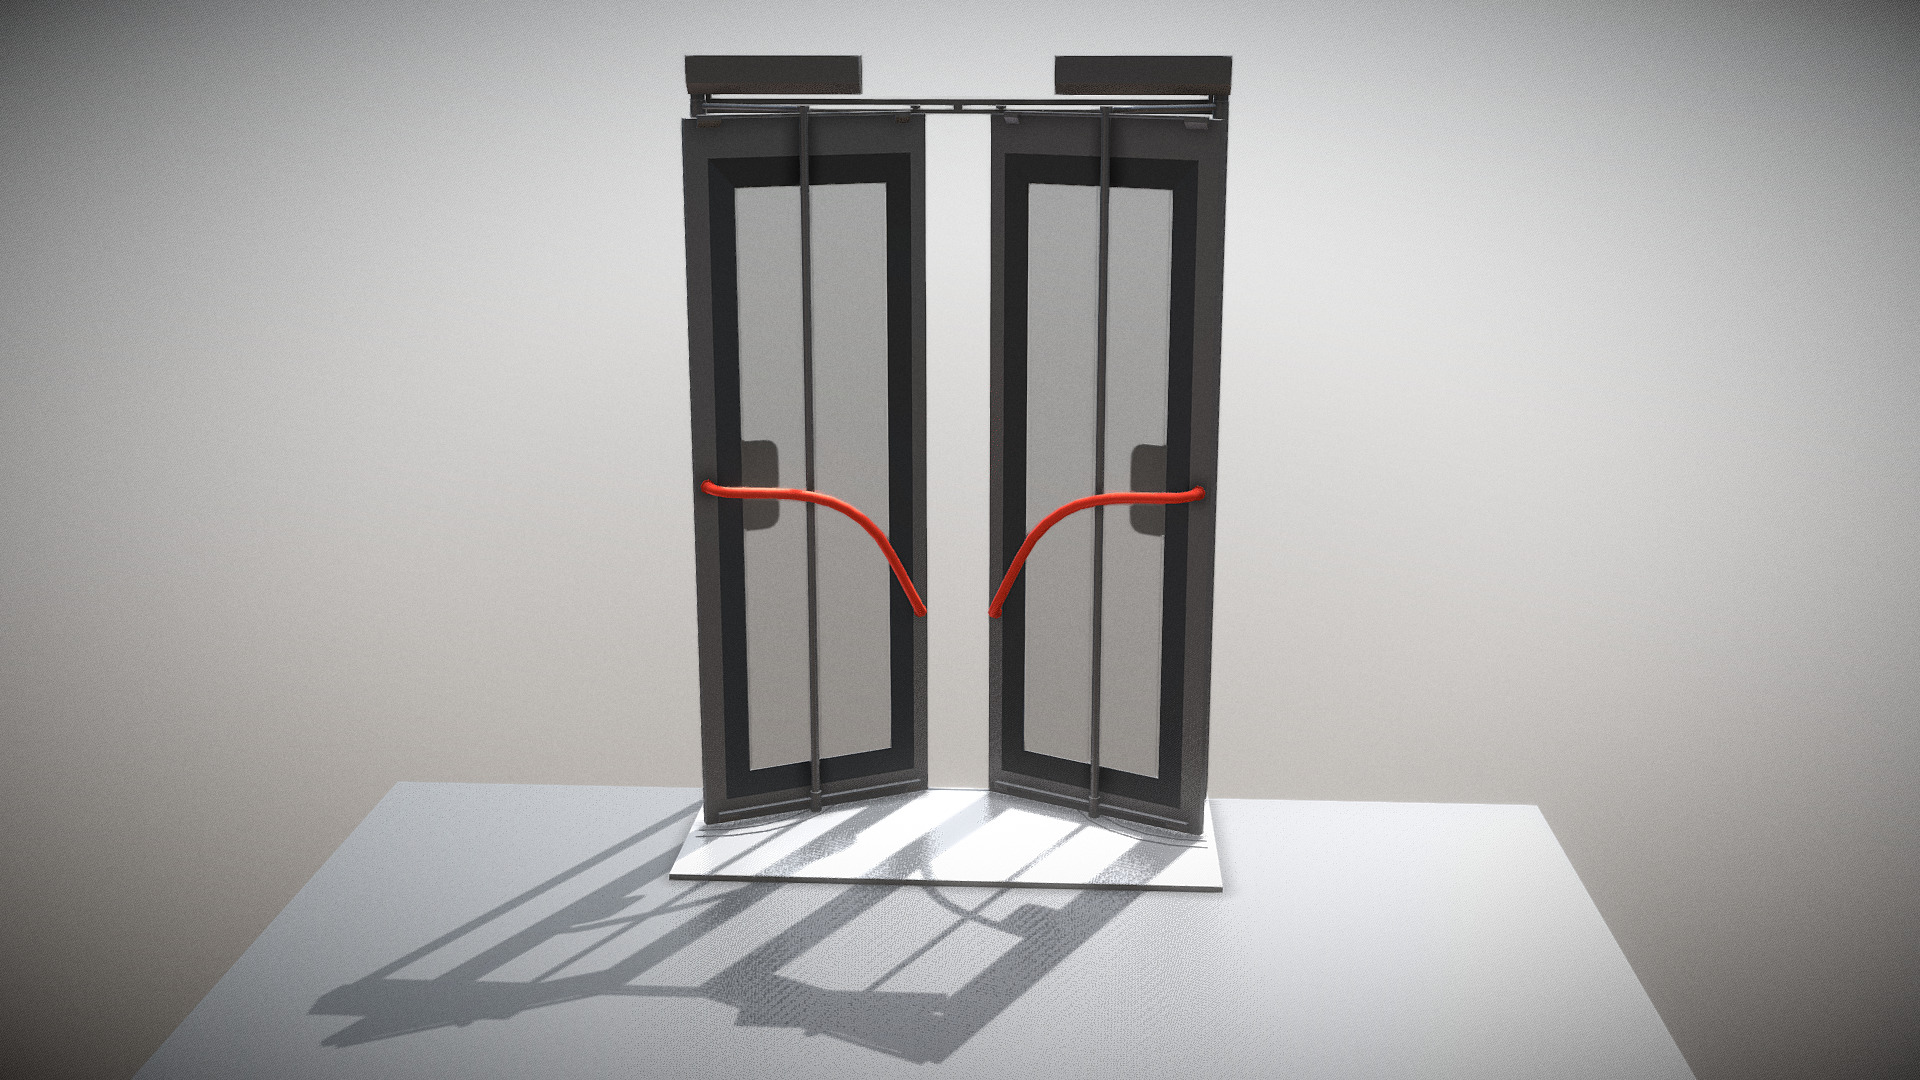 3D model Bus Door (1) Inward Gliding (Rig and Animation) - This is a 3D model of the Bus Door (1) Inward Gliding (Rig and Animation). The 3D model is about a black and white room with a glass door and a white floor.